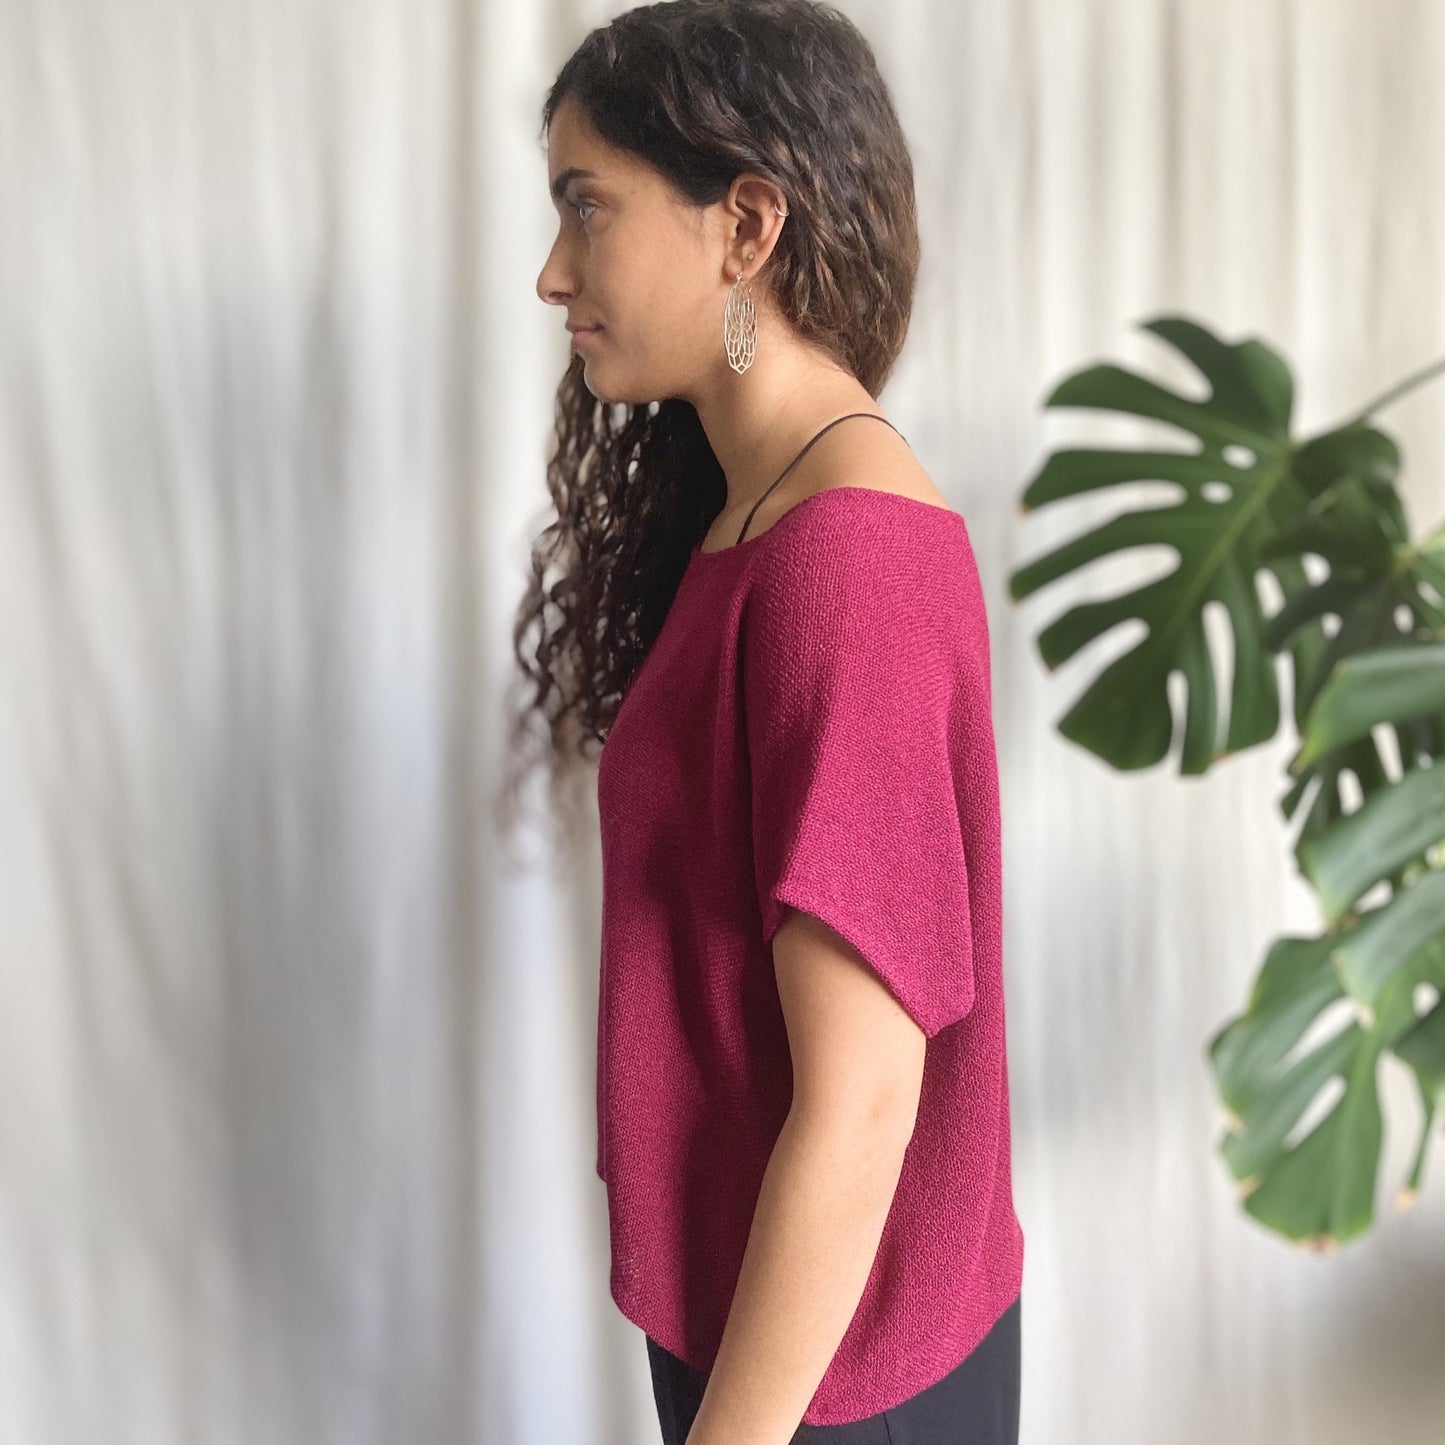 side view of lady wearing pink top